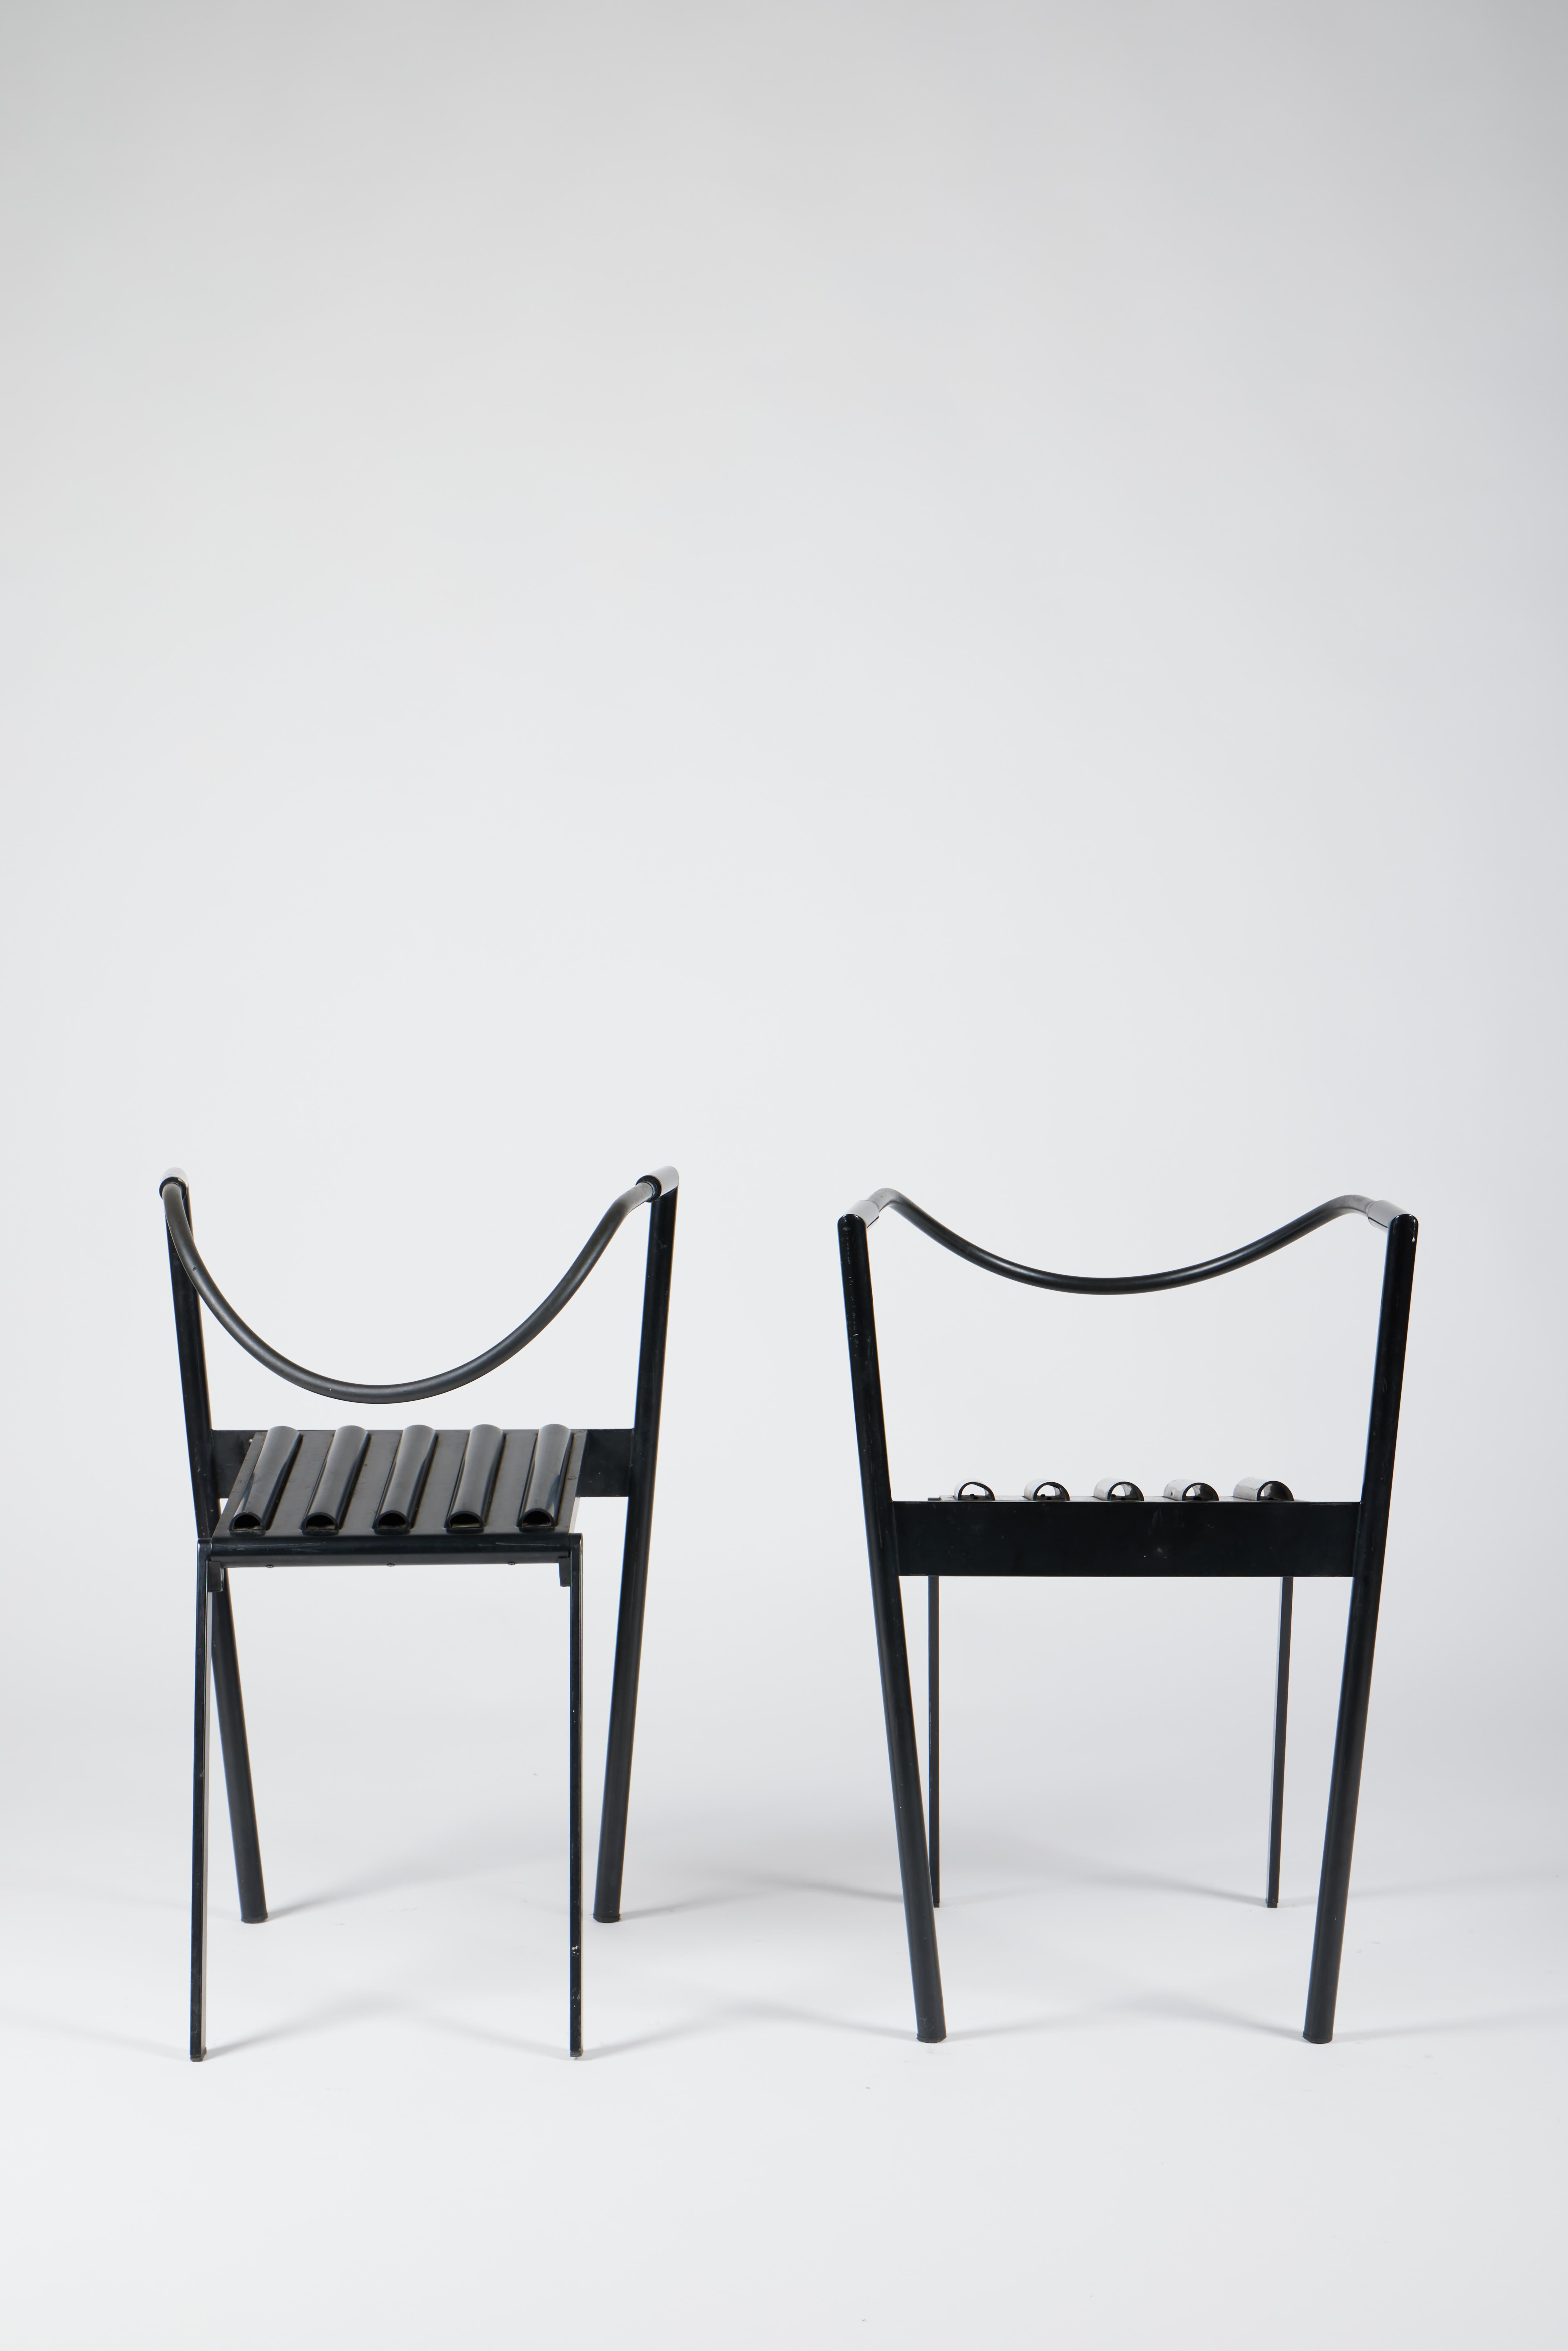 Late 20th Century Paolo Pallucco and Mireille Rivier set of 2 Hans e Alice chairs, 1986 For Sale